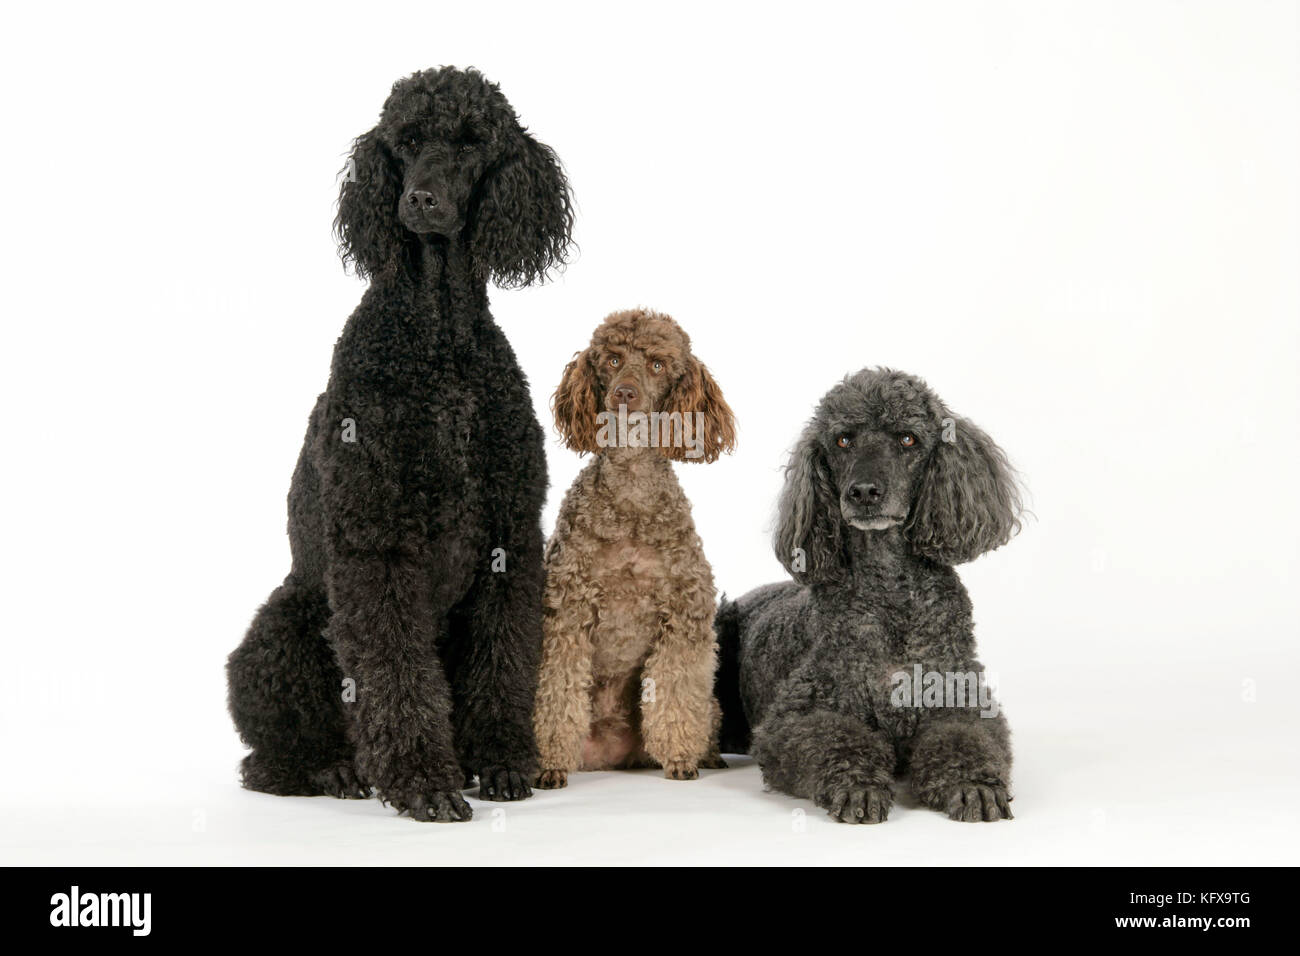 DOG. Black poodle, grey poodle and brown miniature poodle Stock Photo